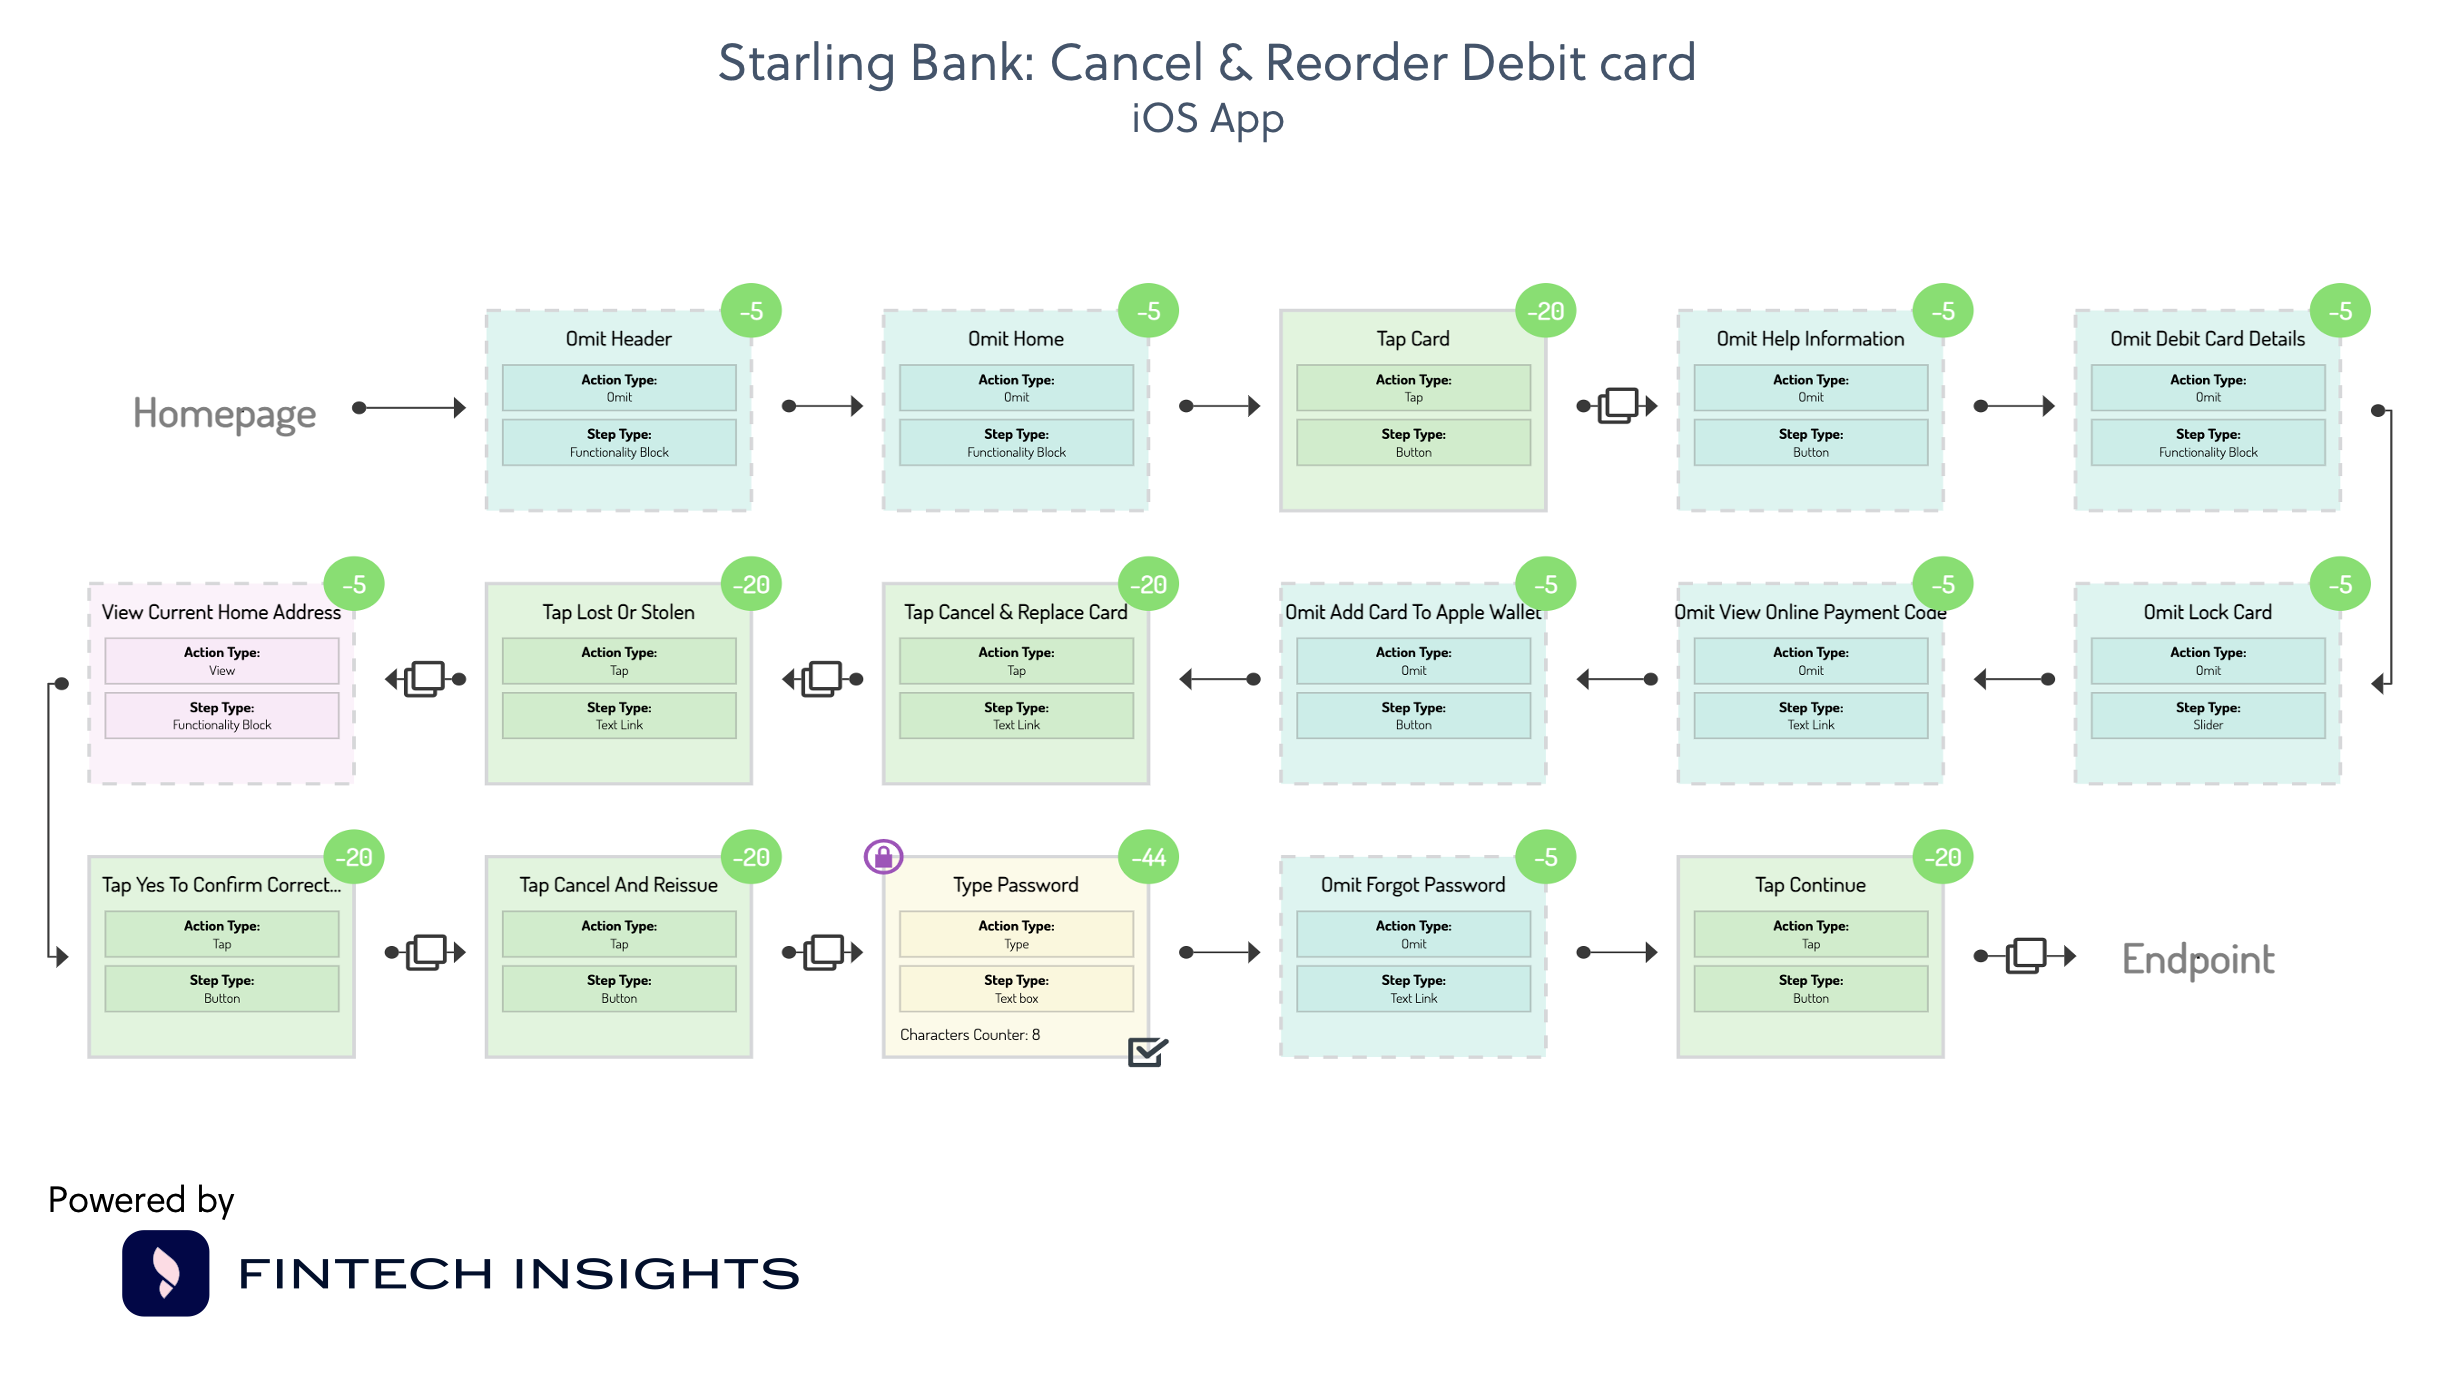 Starling Bank: Cancel and Reorder Debit Card